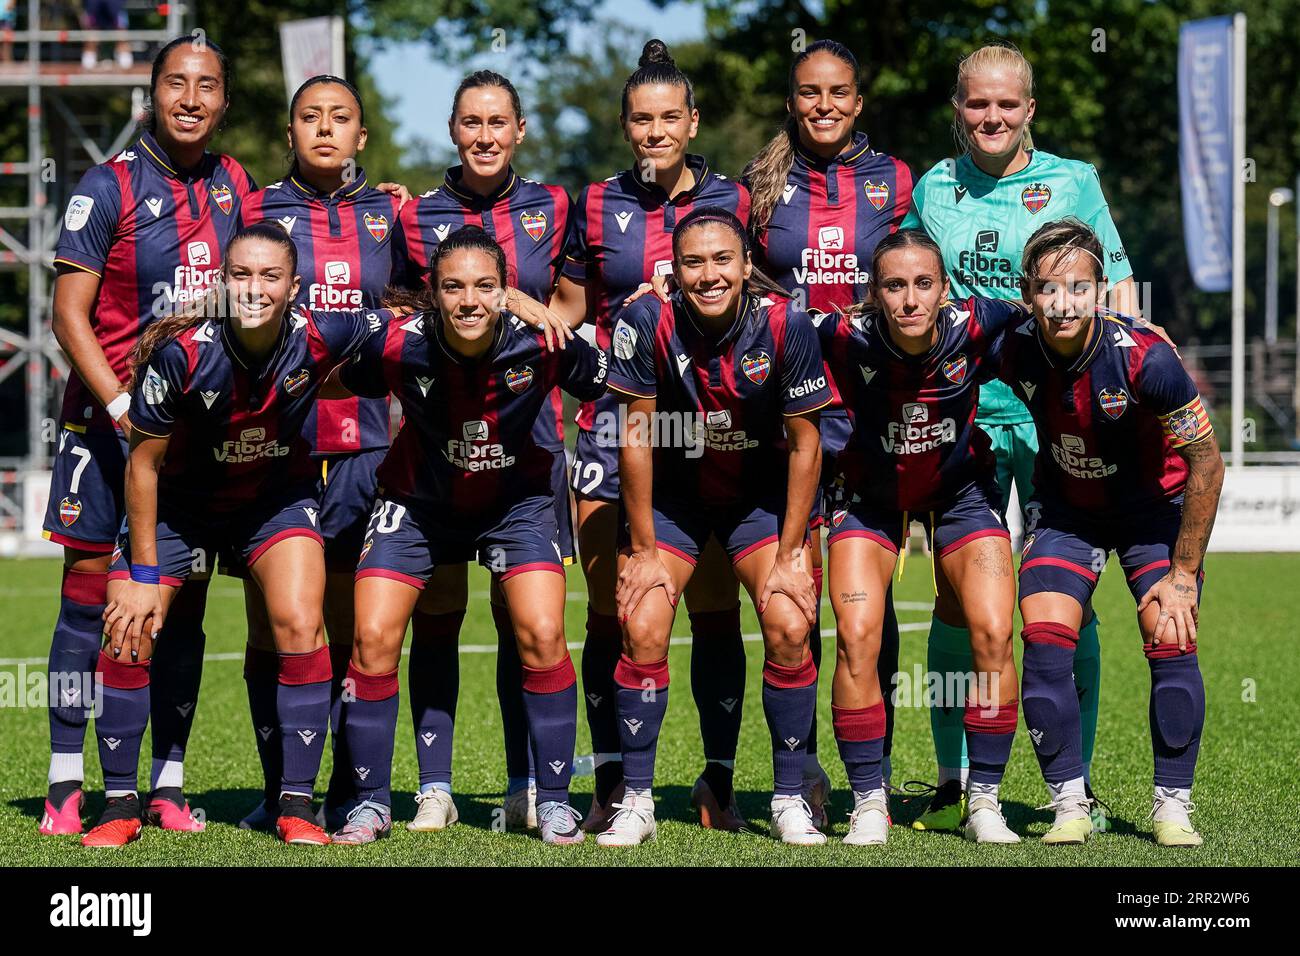 ENSCHEDE, NETHERLANDS - SEPTEMBER 6: Mayra Ramirez of Levante UD, Paula Fernandez of Levante UD, Silvia Lloris of Levante UD, Antonia of Levante UD, Angela Sosa of Levante UD, Goalkeeper Emma Holmgren of Levante UD, Leire Banos Indakoetxea of Levante UD, Paula Tomas Serer of Levante UD, Nuria Mendoza Miralles of Levante UD, Gabi Nunes of Levante UD and Natasha Andonova of Levante UD during the UEFA Women's Champions League LP Group 1 Semi Final match between Levante UD and Stjarnan at the Sportpark Schreurserve on September 6, 2023 in Enschede, Netherlands (Photo by Rene Nijhuis/BSR Agency) Stock Photo